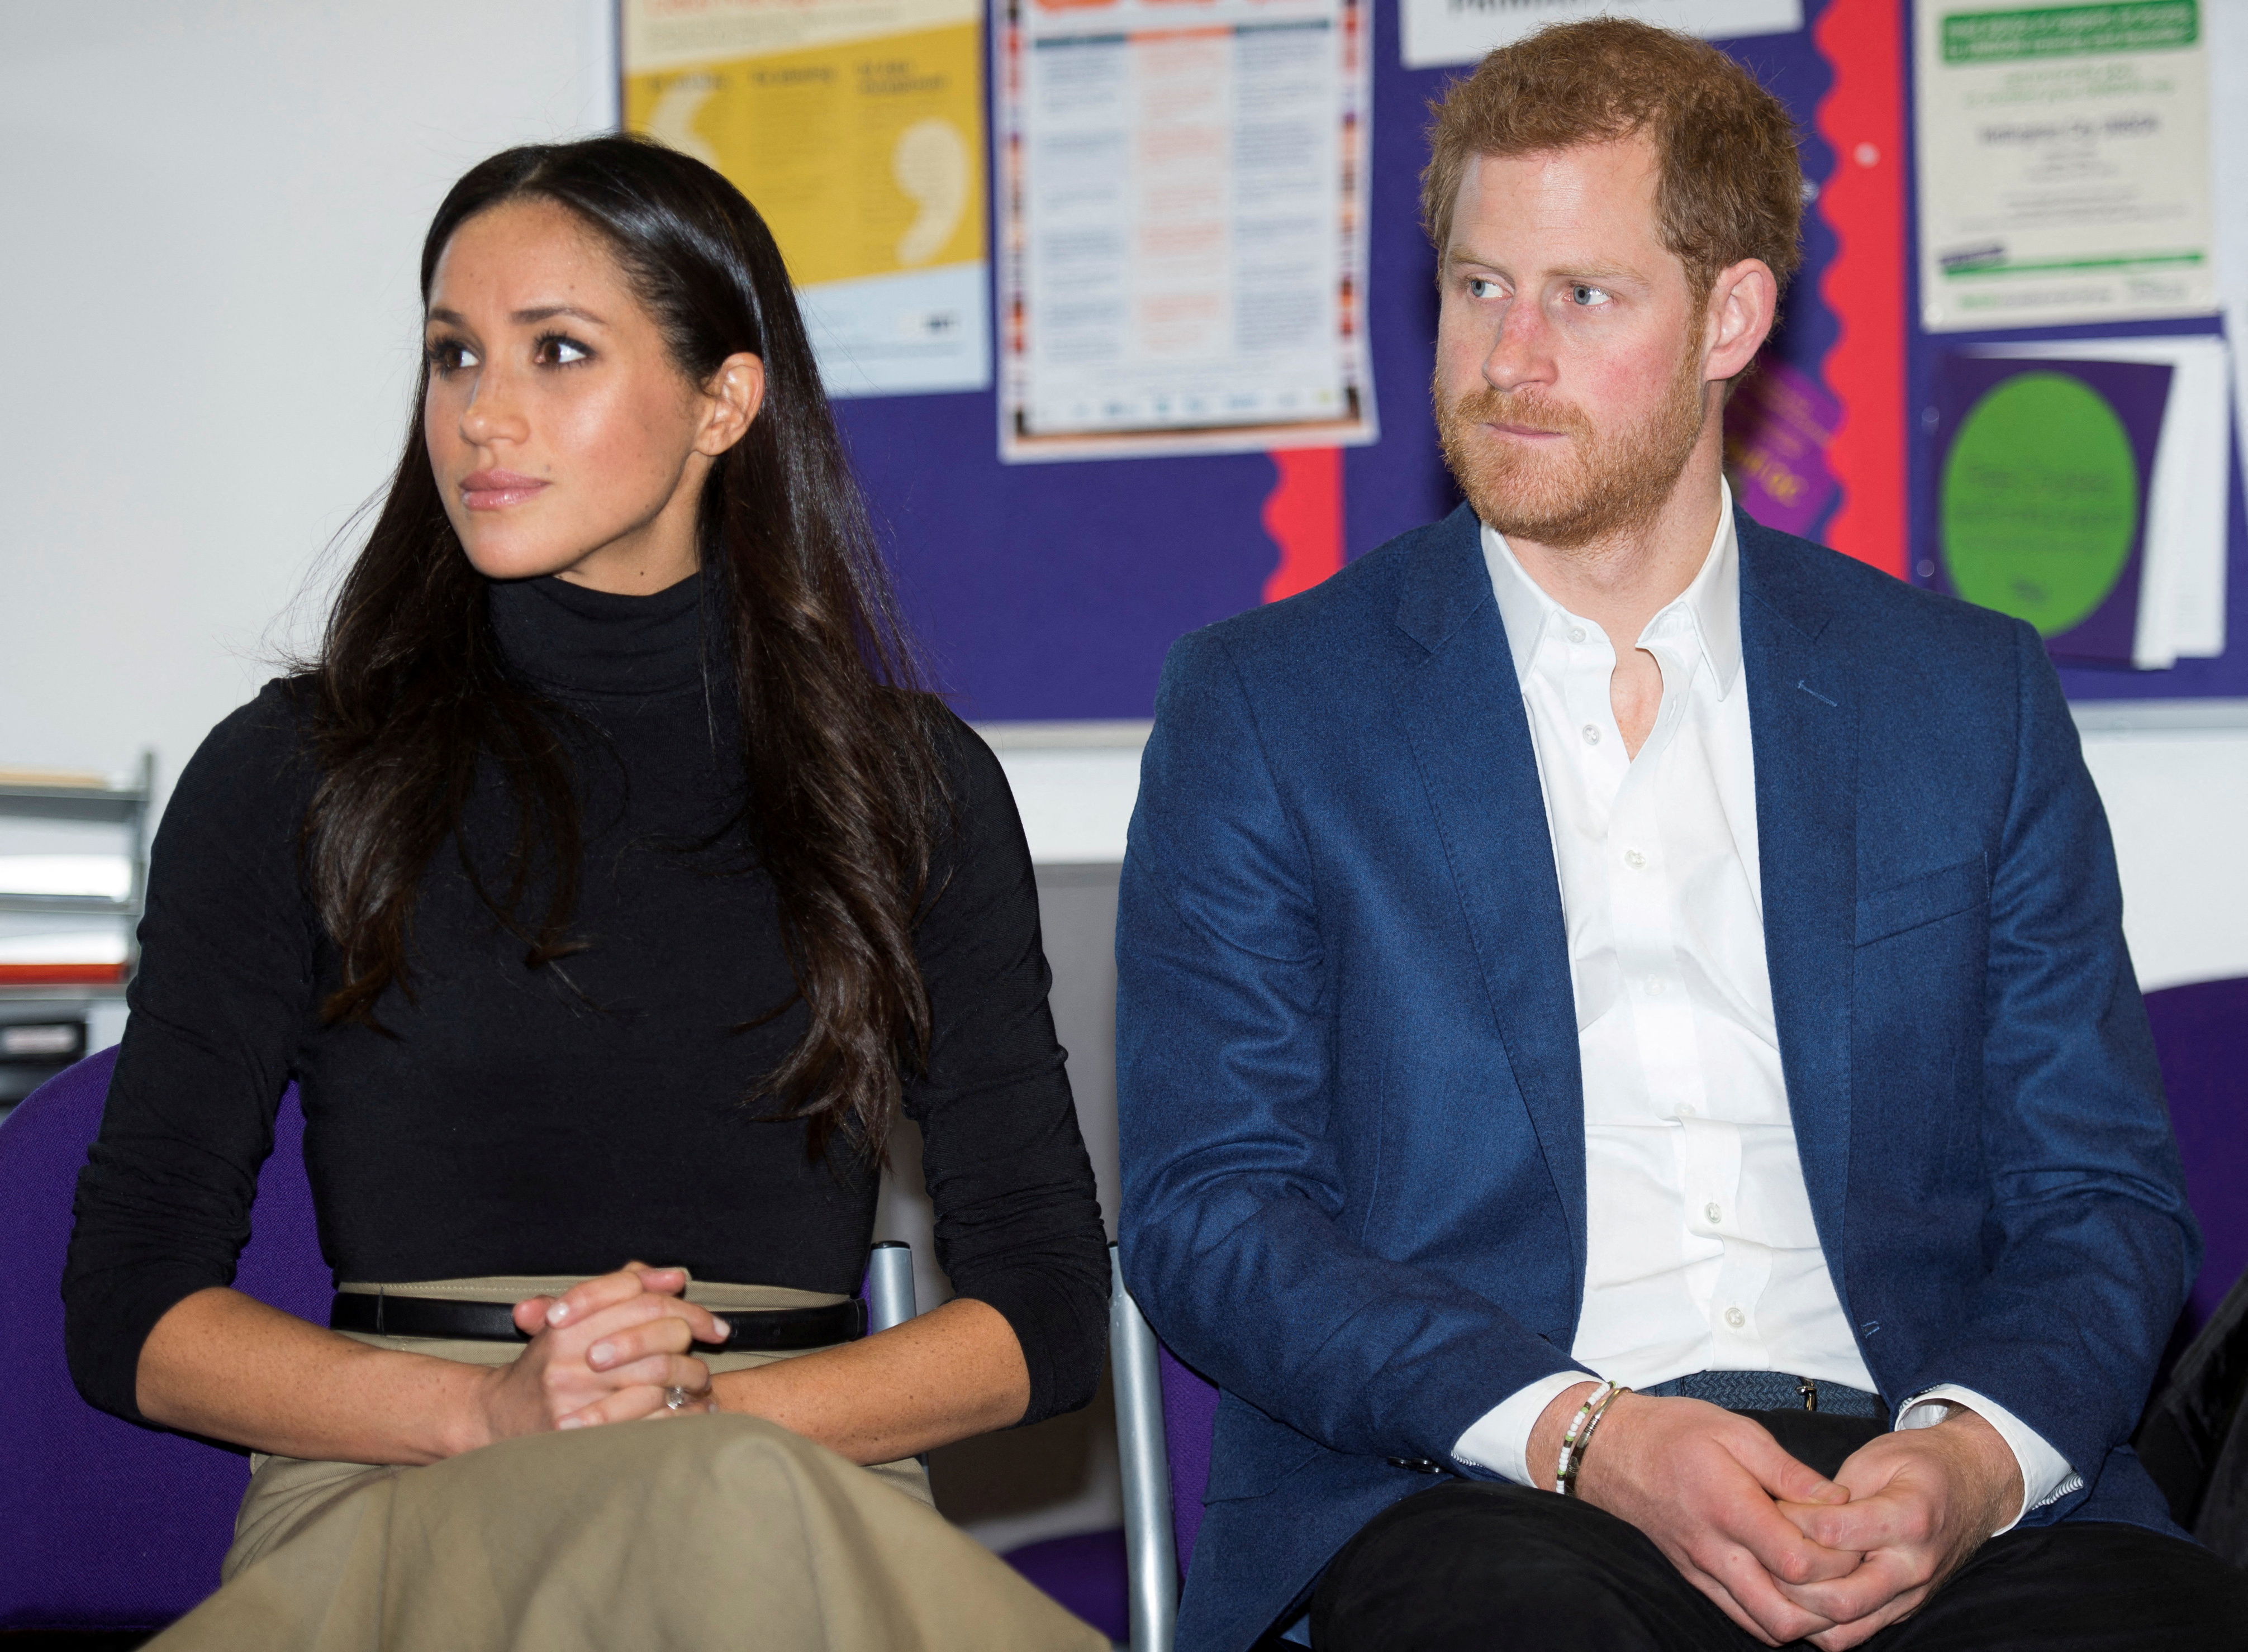 lFILE PHOTO: Britain's Prince Harry and his fiancee Megan Markle visit Nottingham Academy in Nottingham